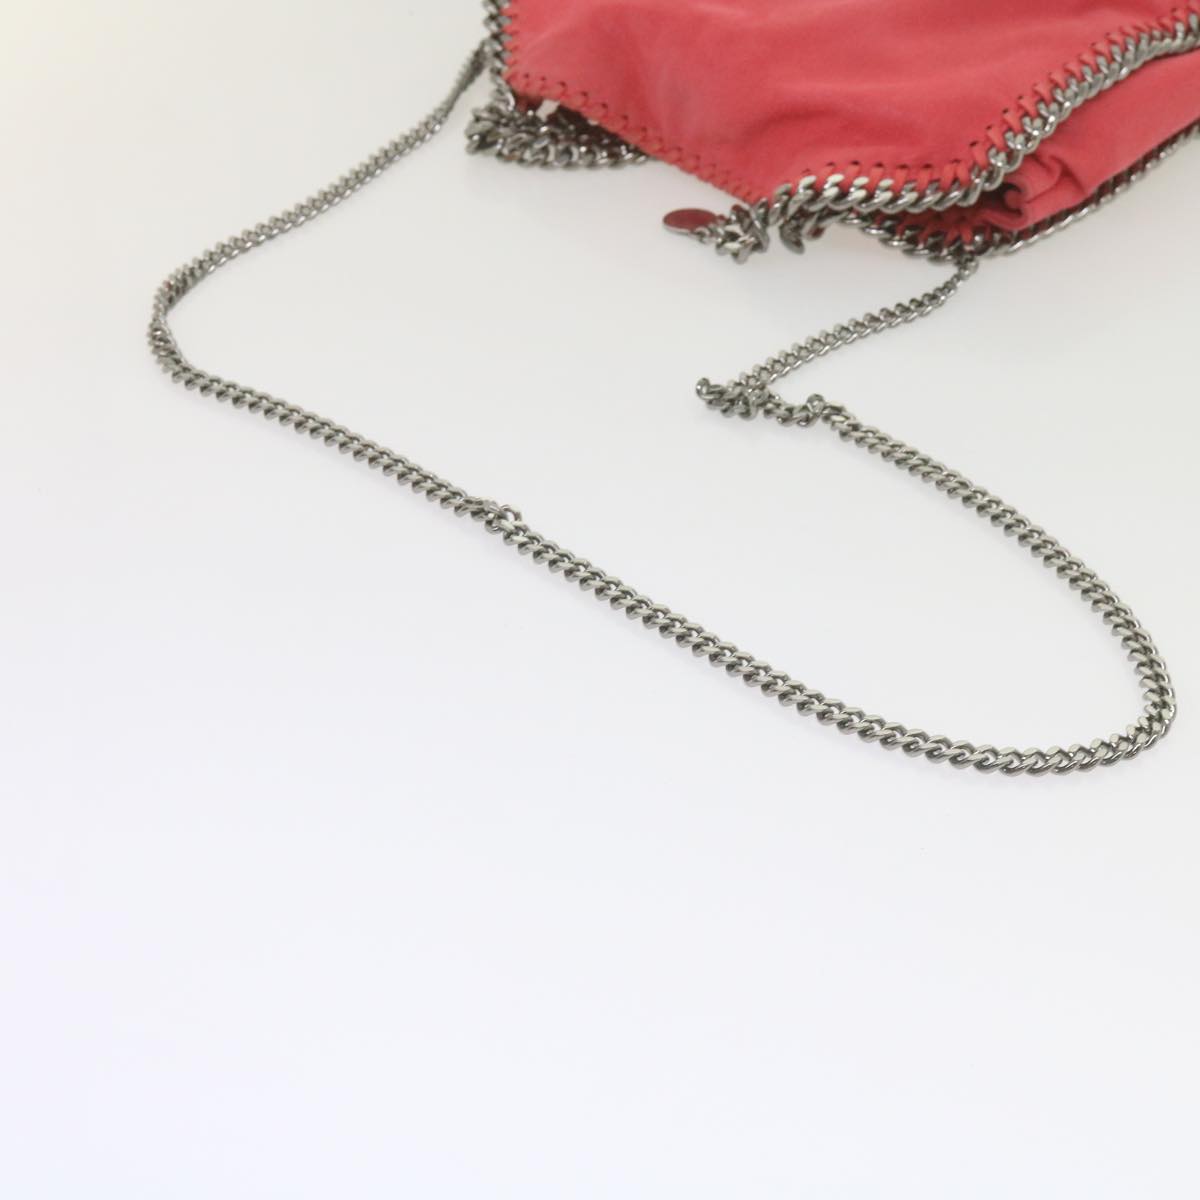 Stella MacCartney Quilted Chain Falabella Shoulder Bag Suede Pink Auth 59749